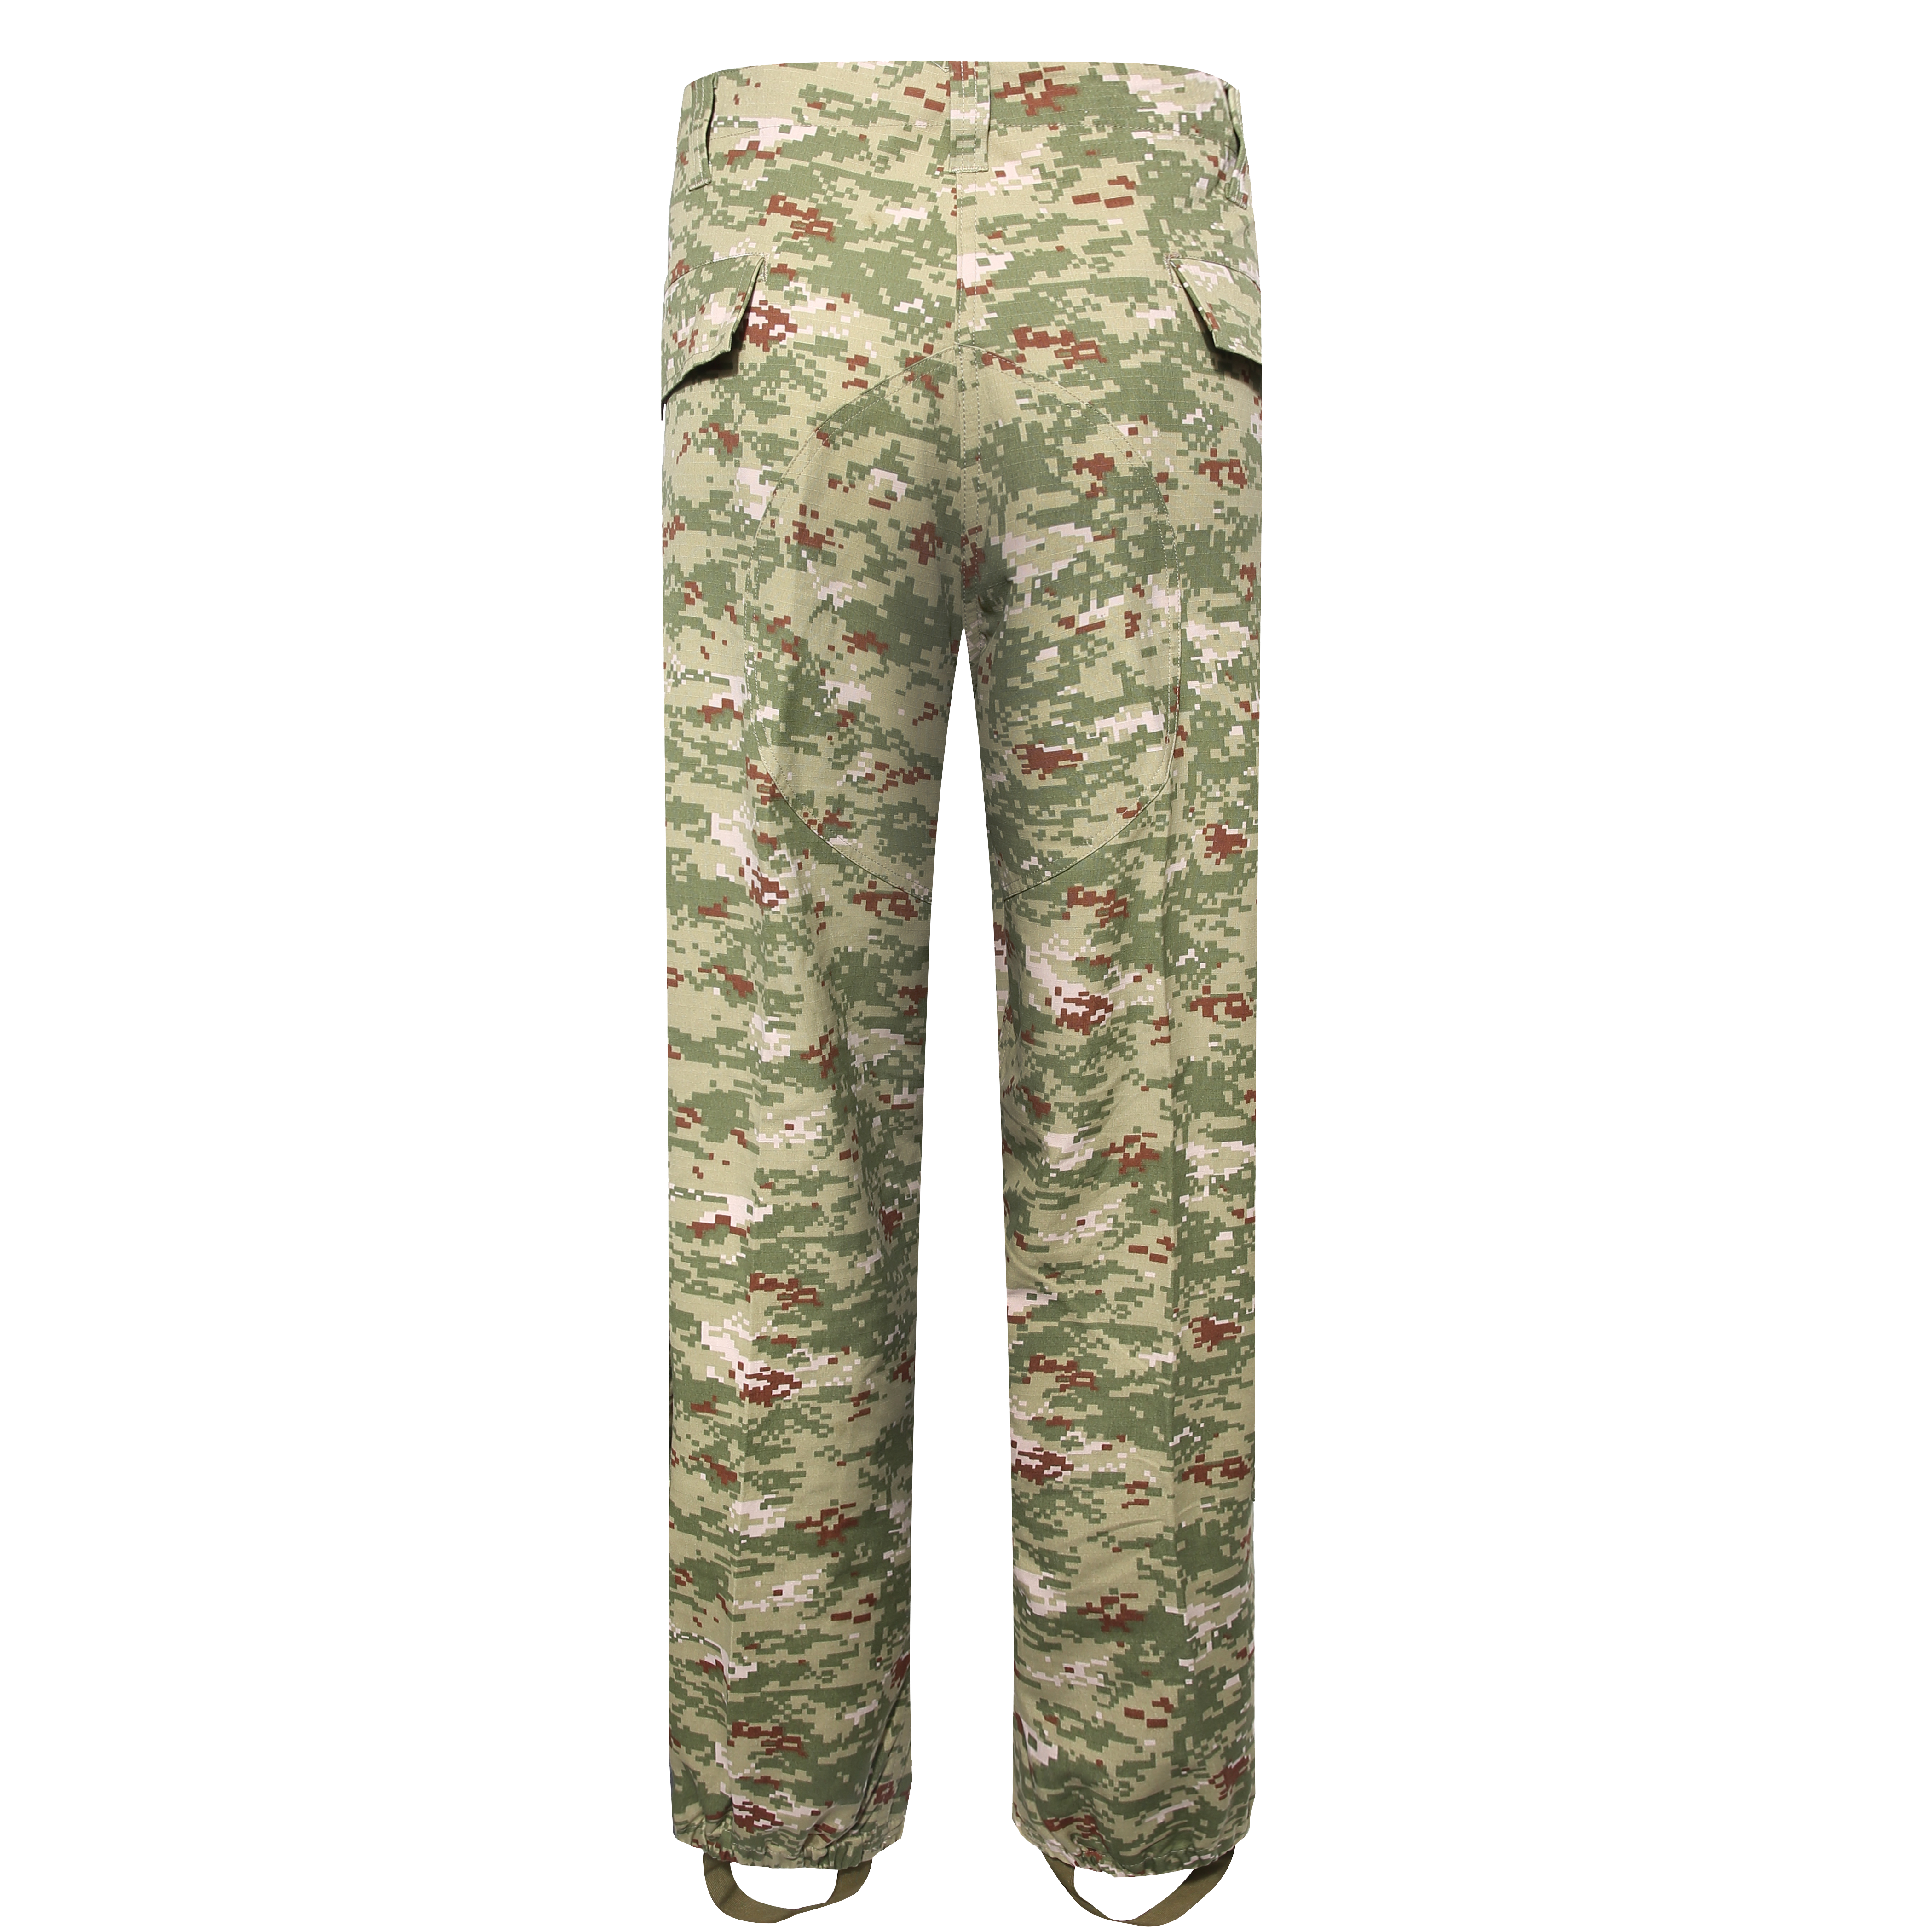 Camouflage Green pants Military Uniform